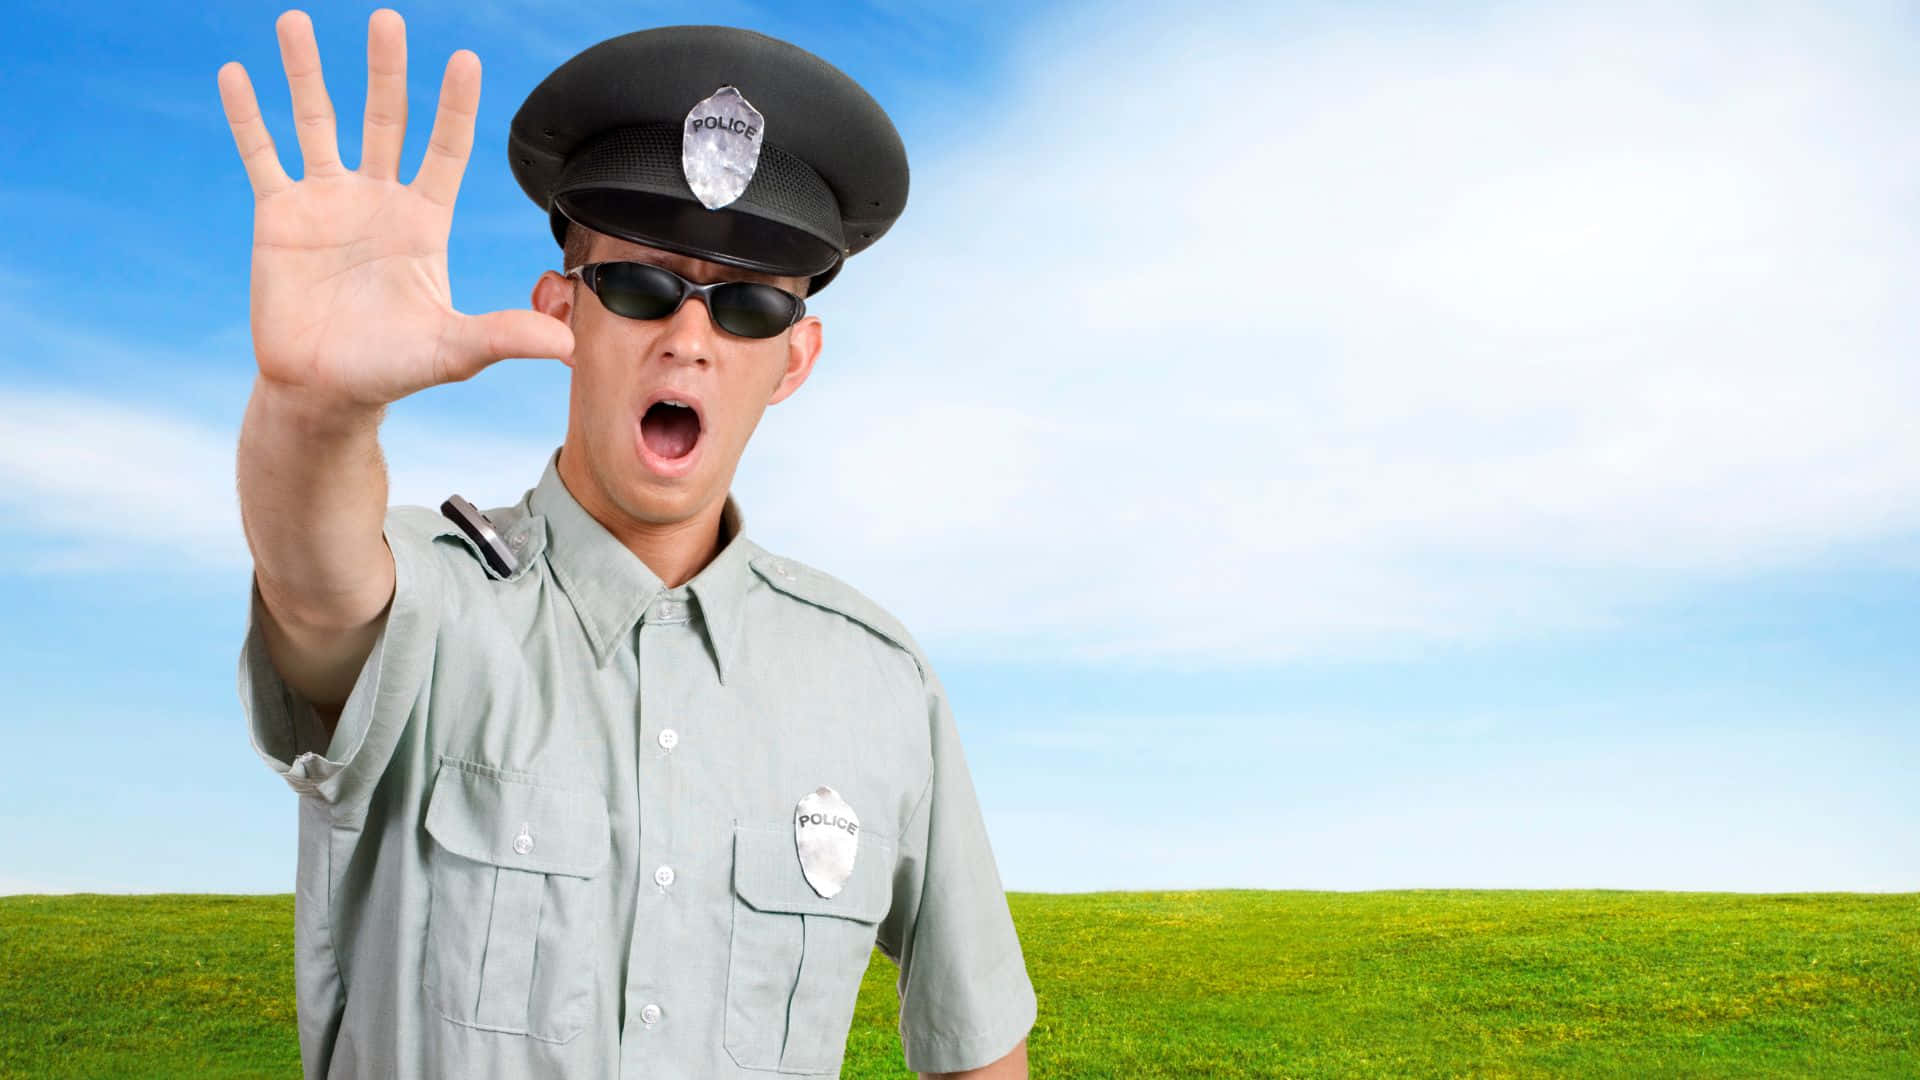 Cop Police Officer With Stop Hand Gesture Wallpaper